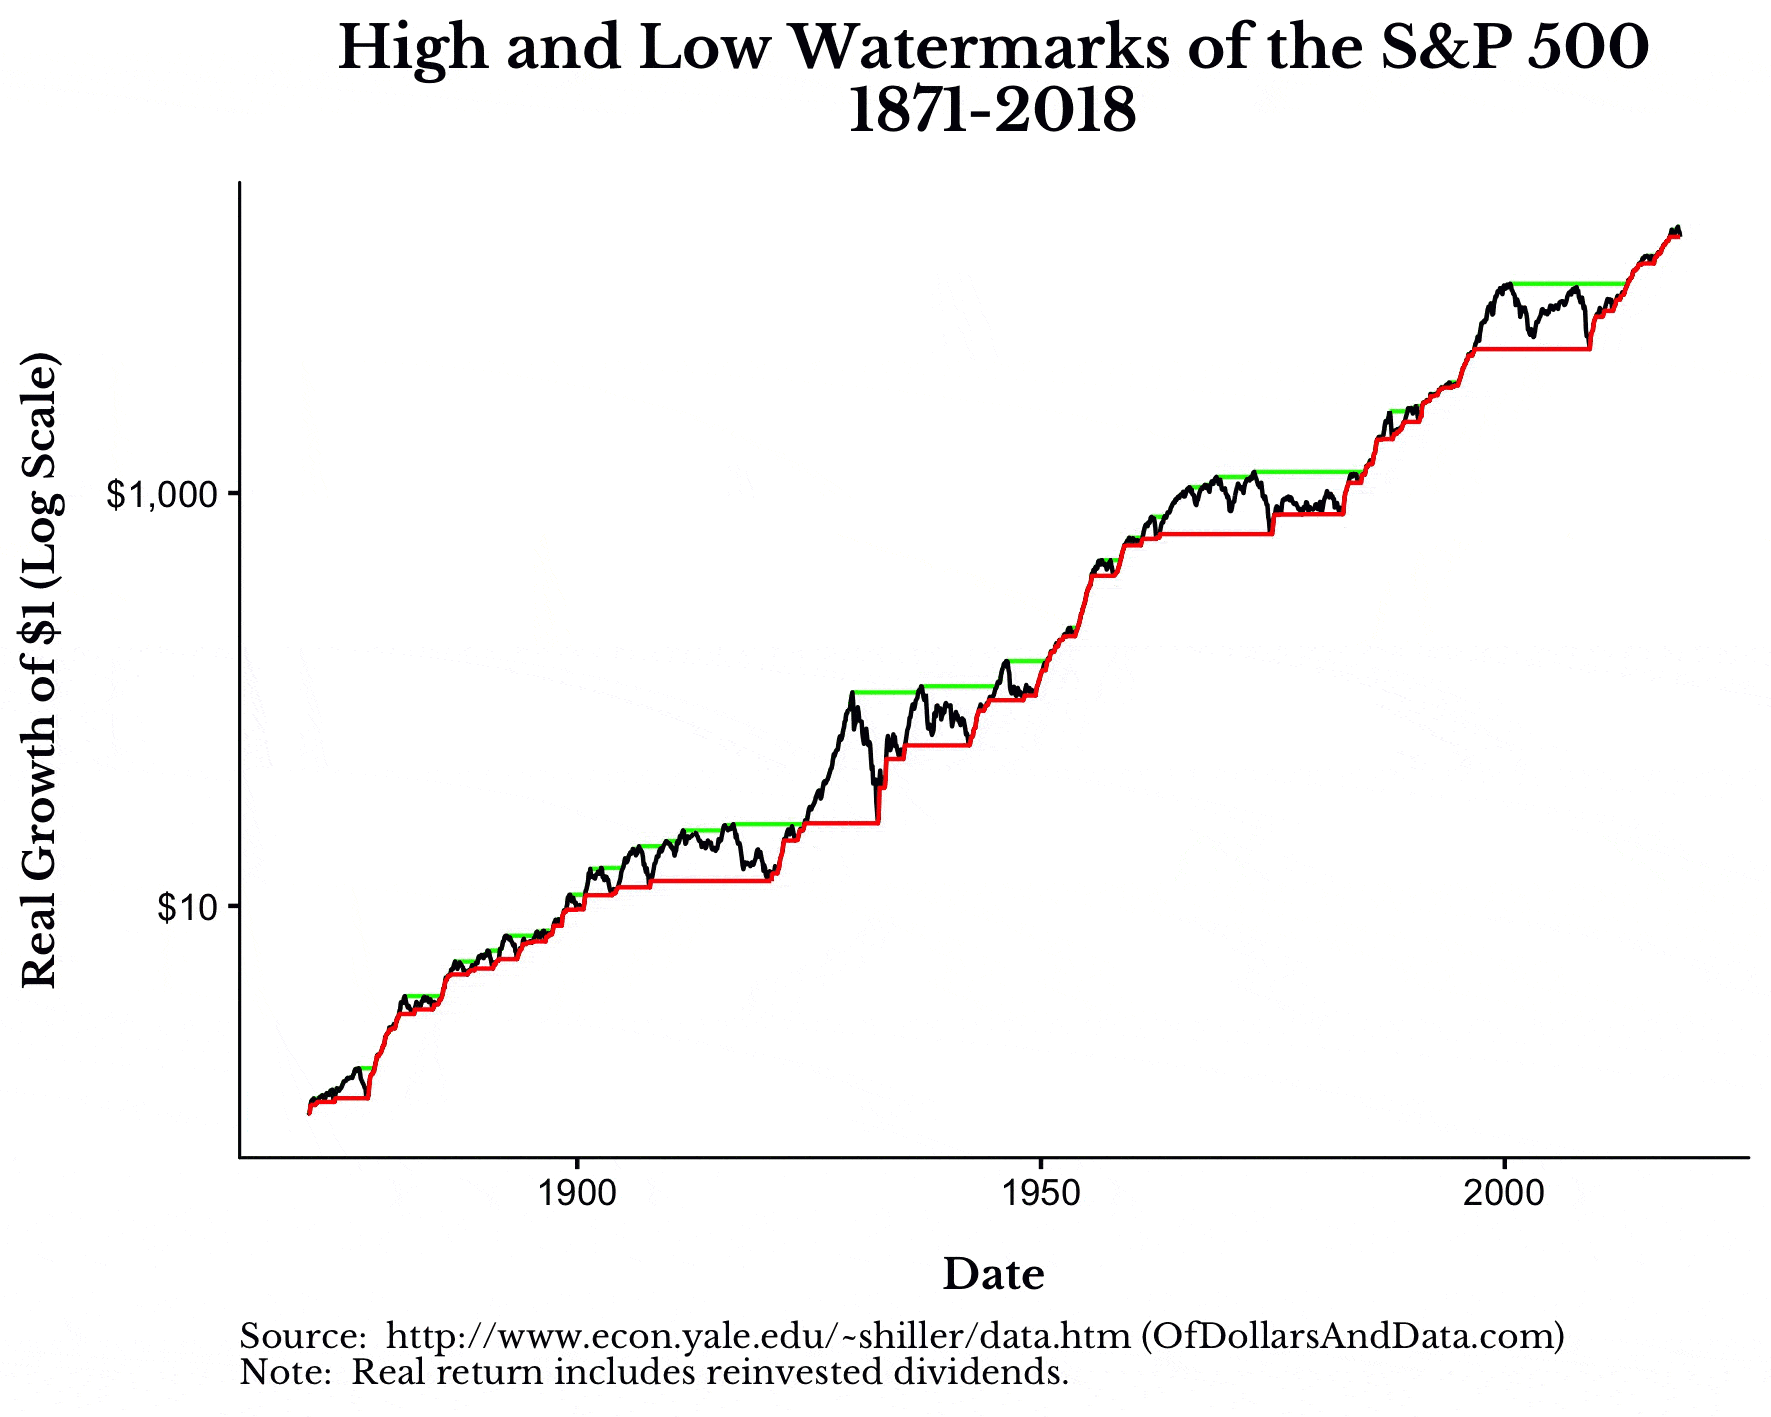 High and low watermarks for S&P 500 from 1871-2018 as a GIF